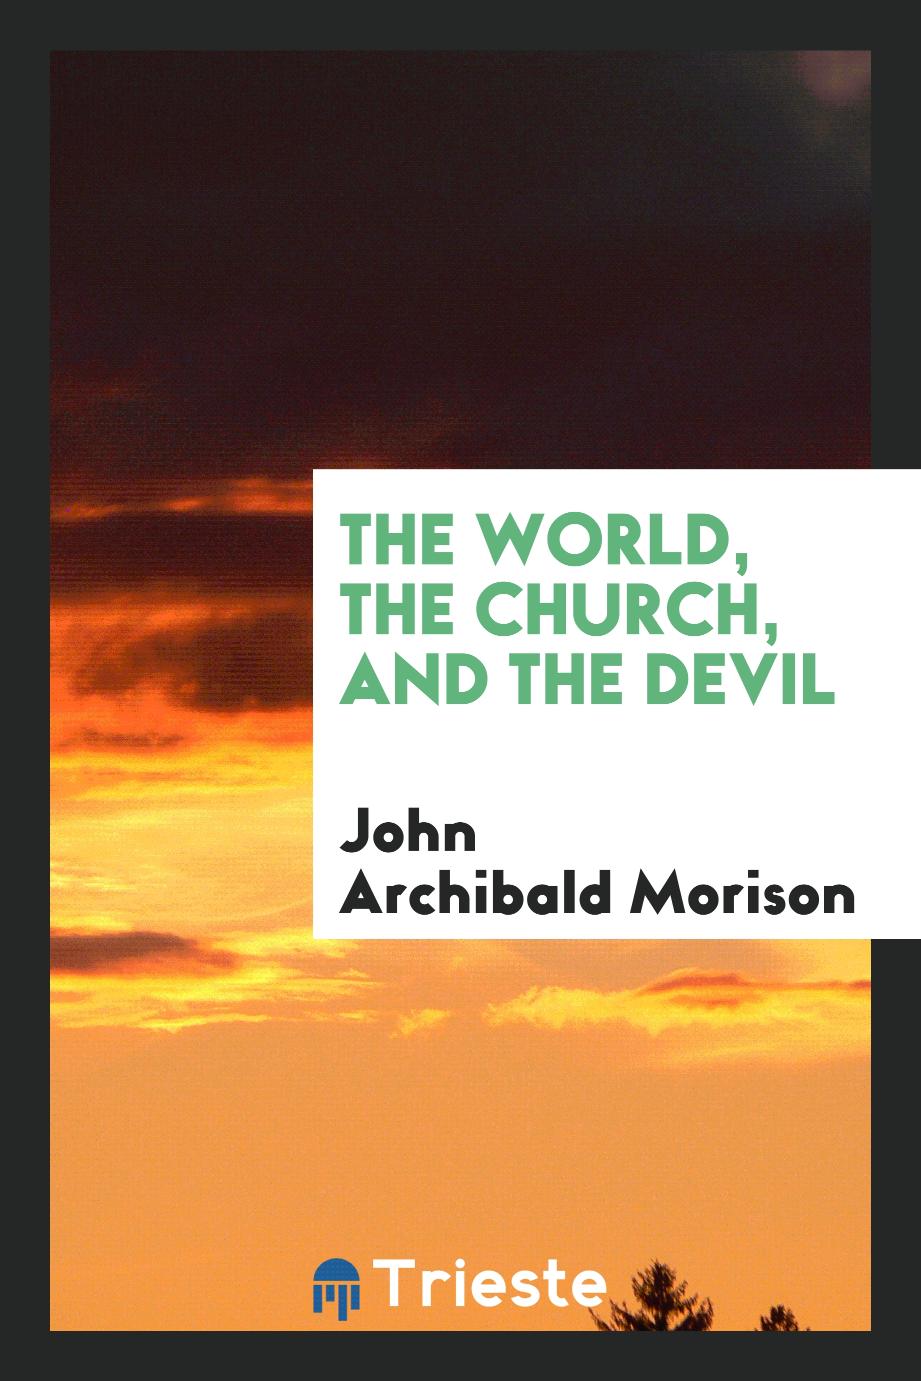 The world, the church, and the devil